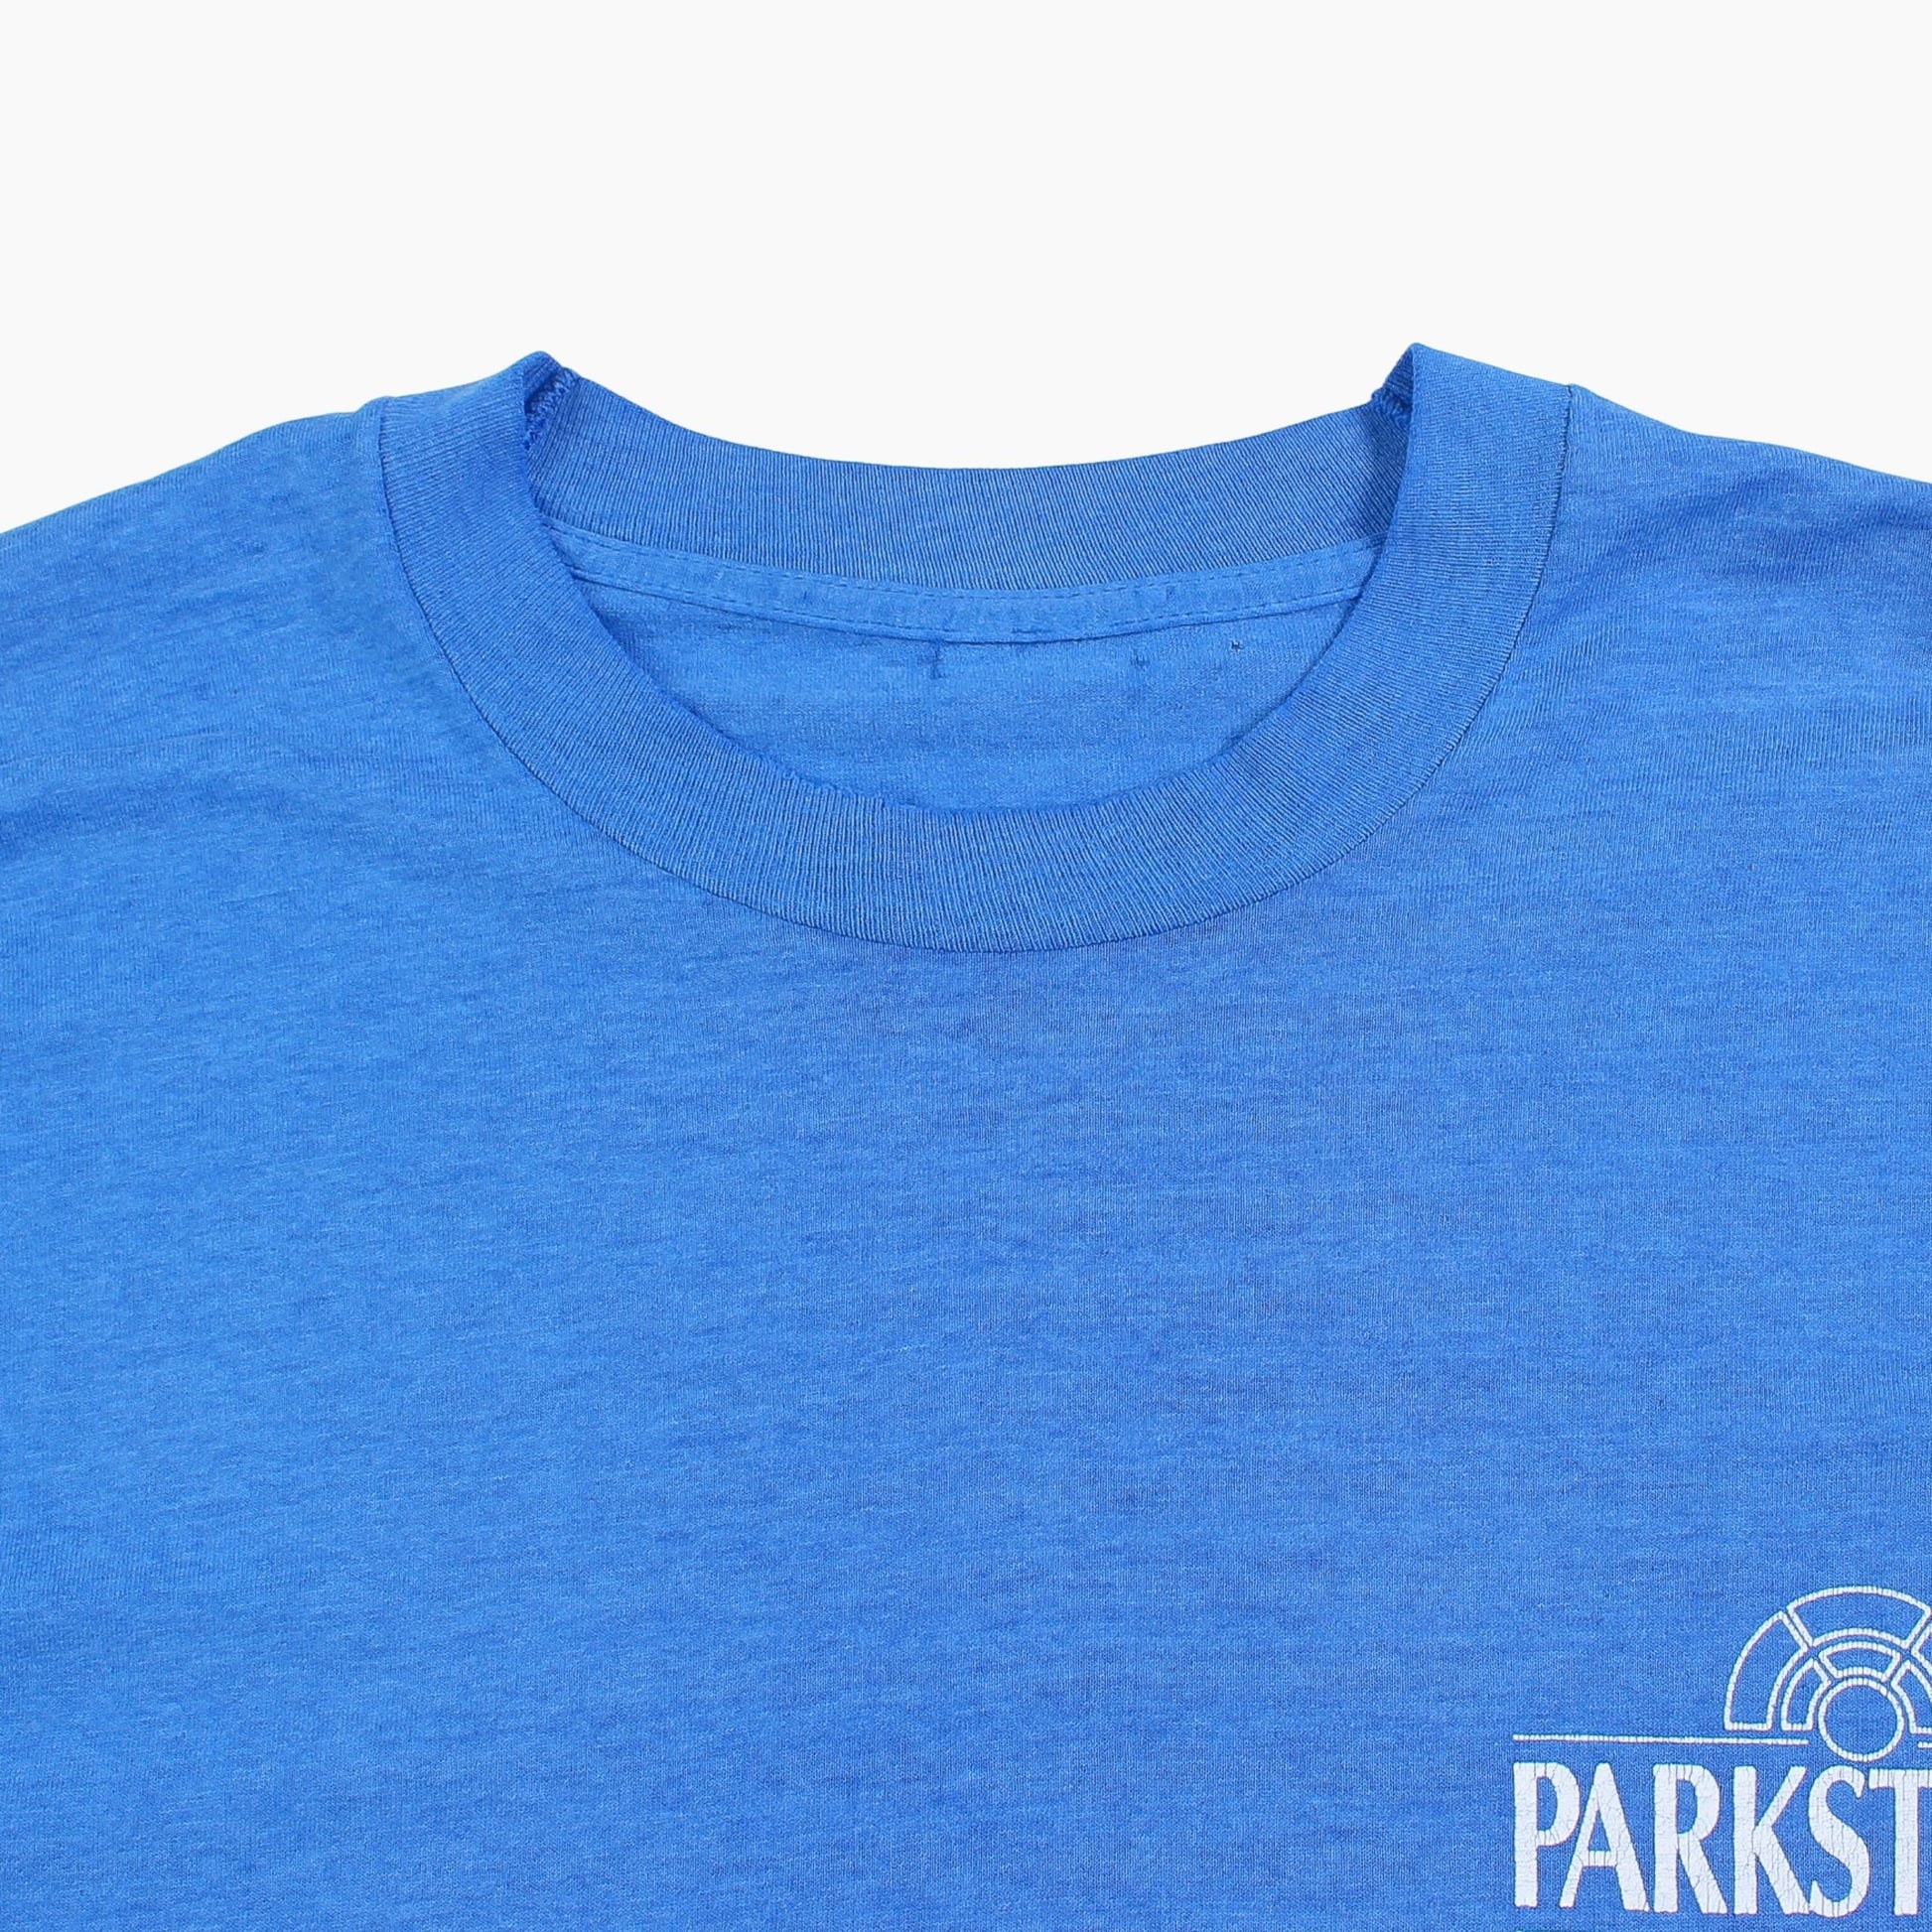 Vintage 'Parkstone Mutual Fund' T-Shirt - American Madness